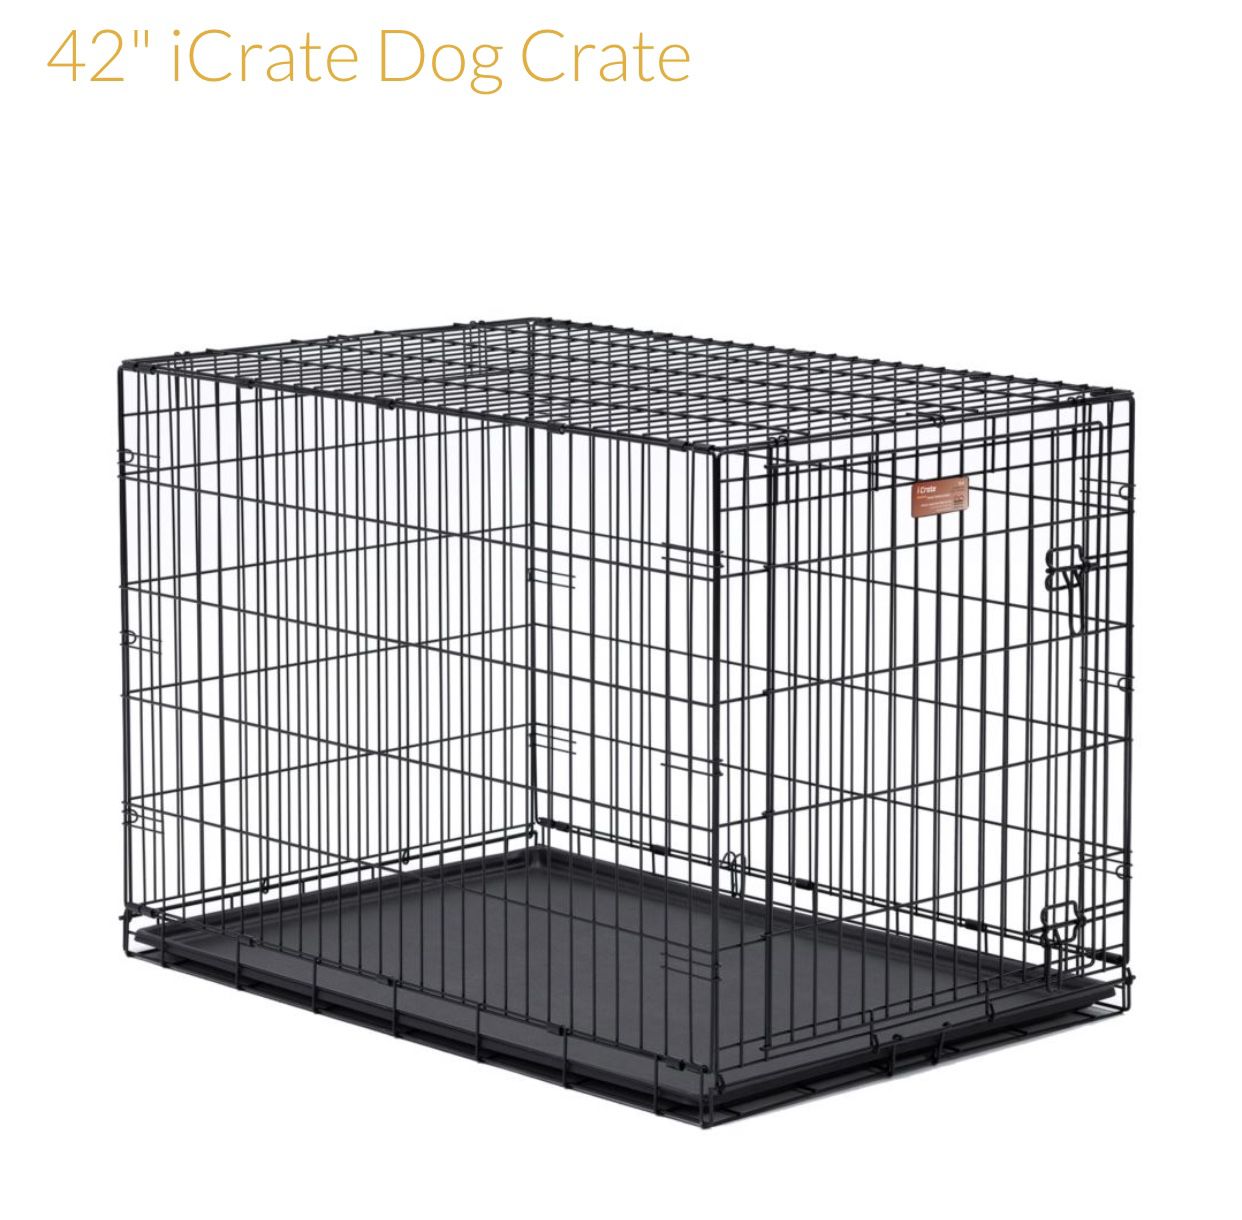 Midwest Large Dog Crate 42”